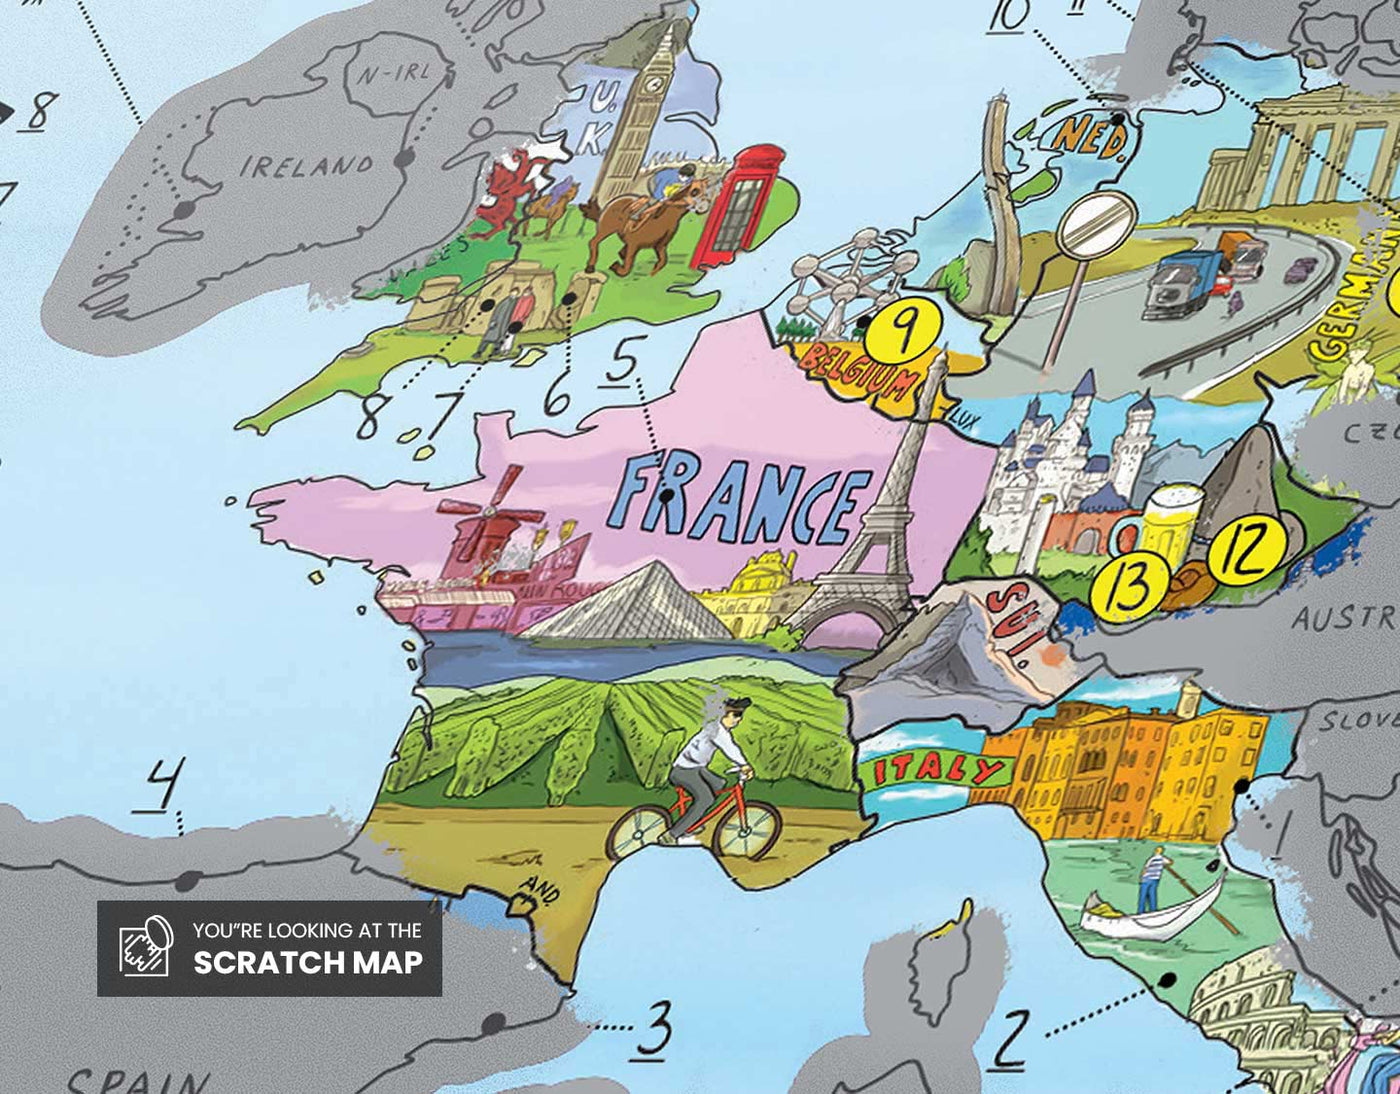 image of the best scratch map